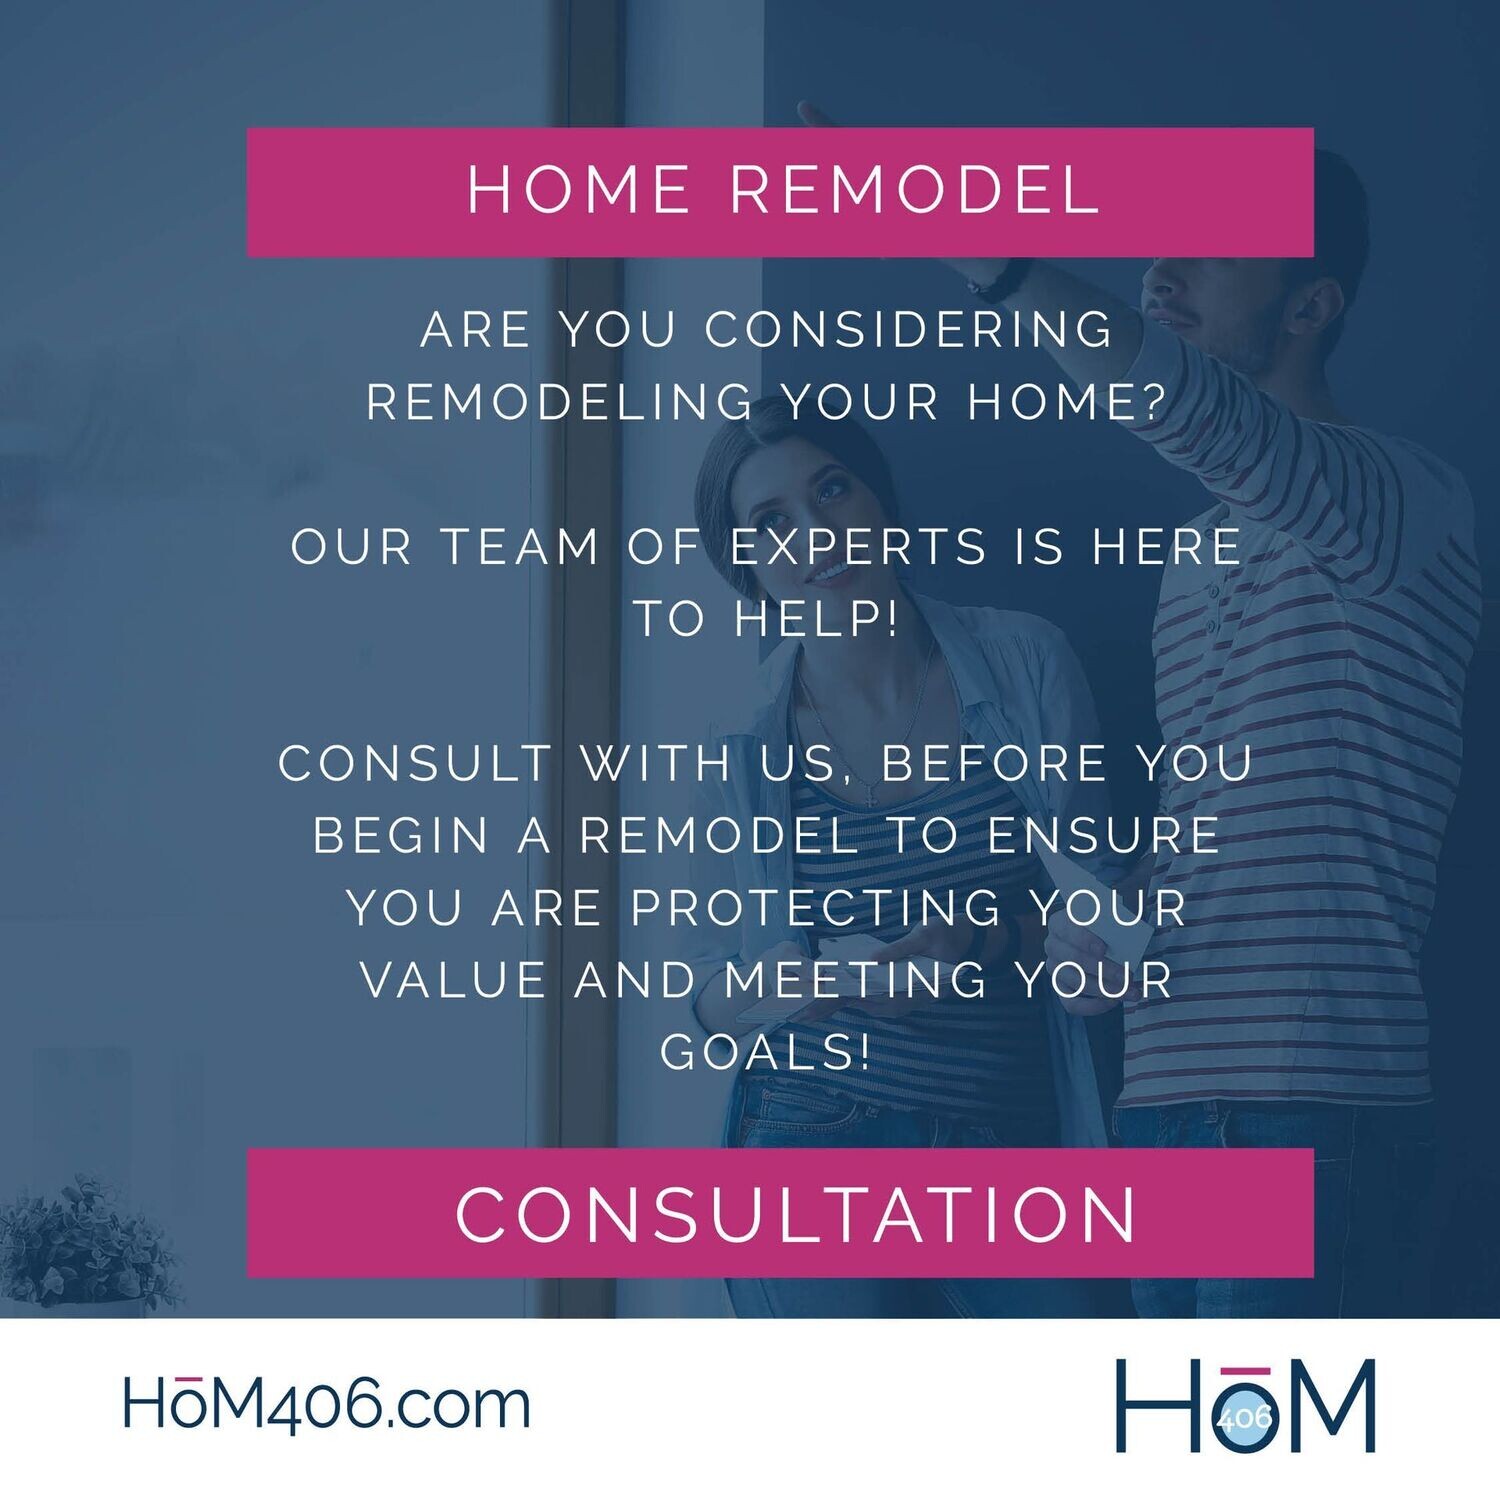 Home Remodel Consultation